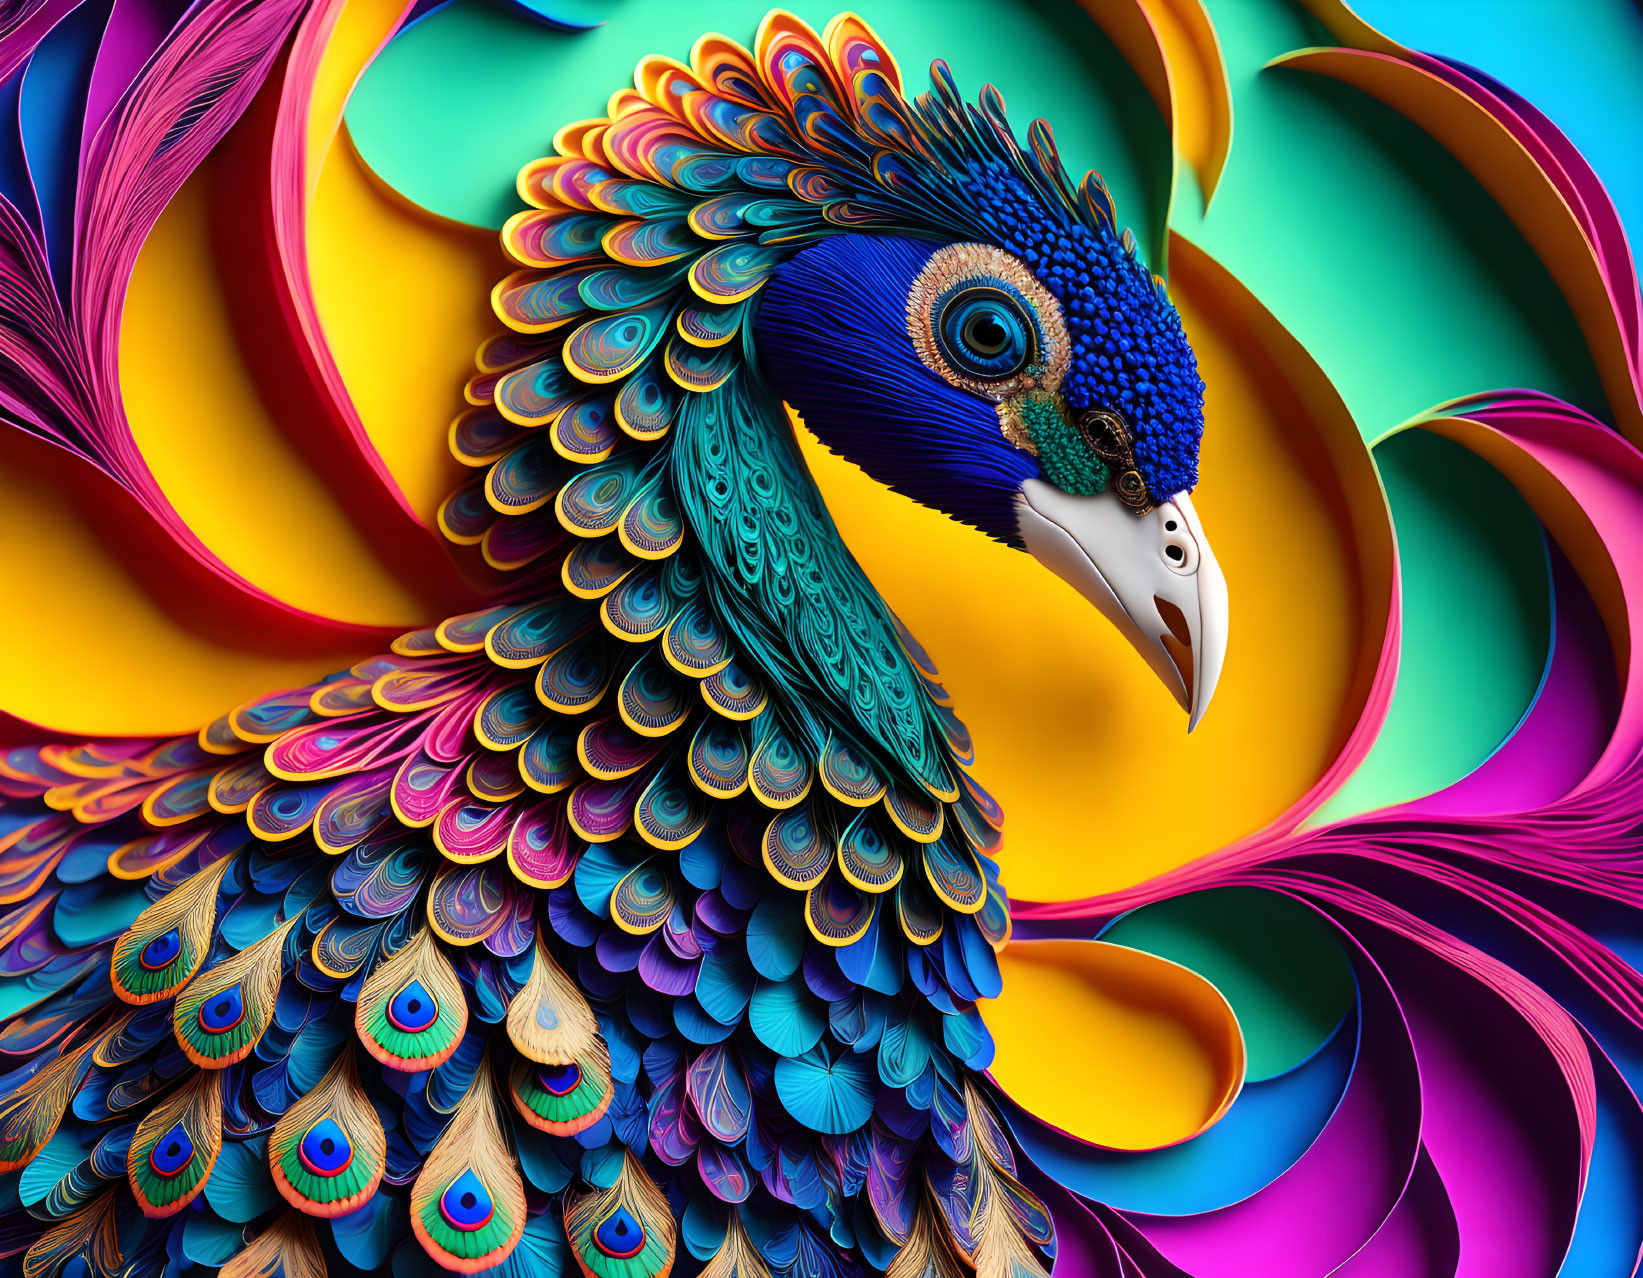 Colorful Peacock Digital Art with Abstract Background